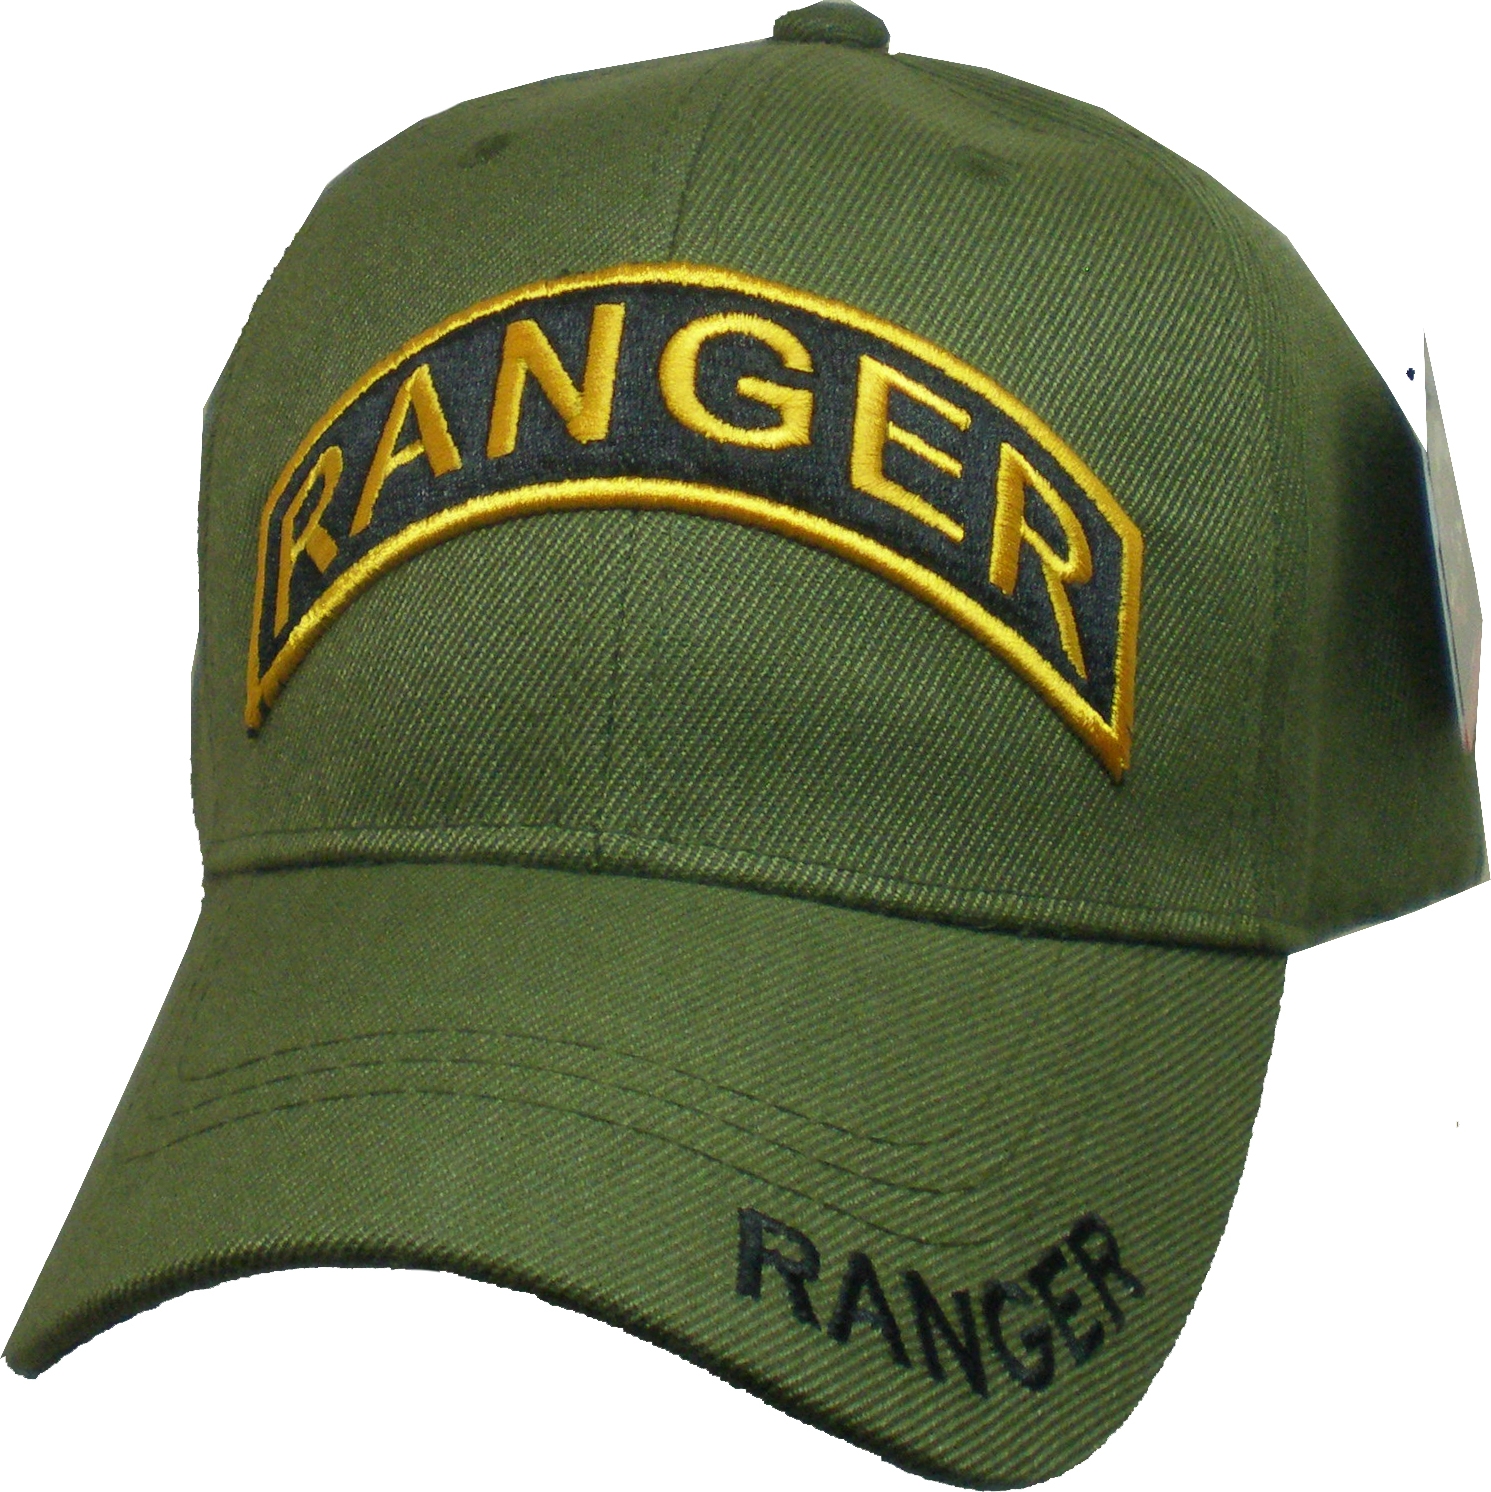 Army Ranger Mens Cap Olive Green Adjustable Product Details The